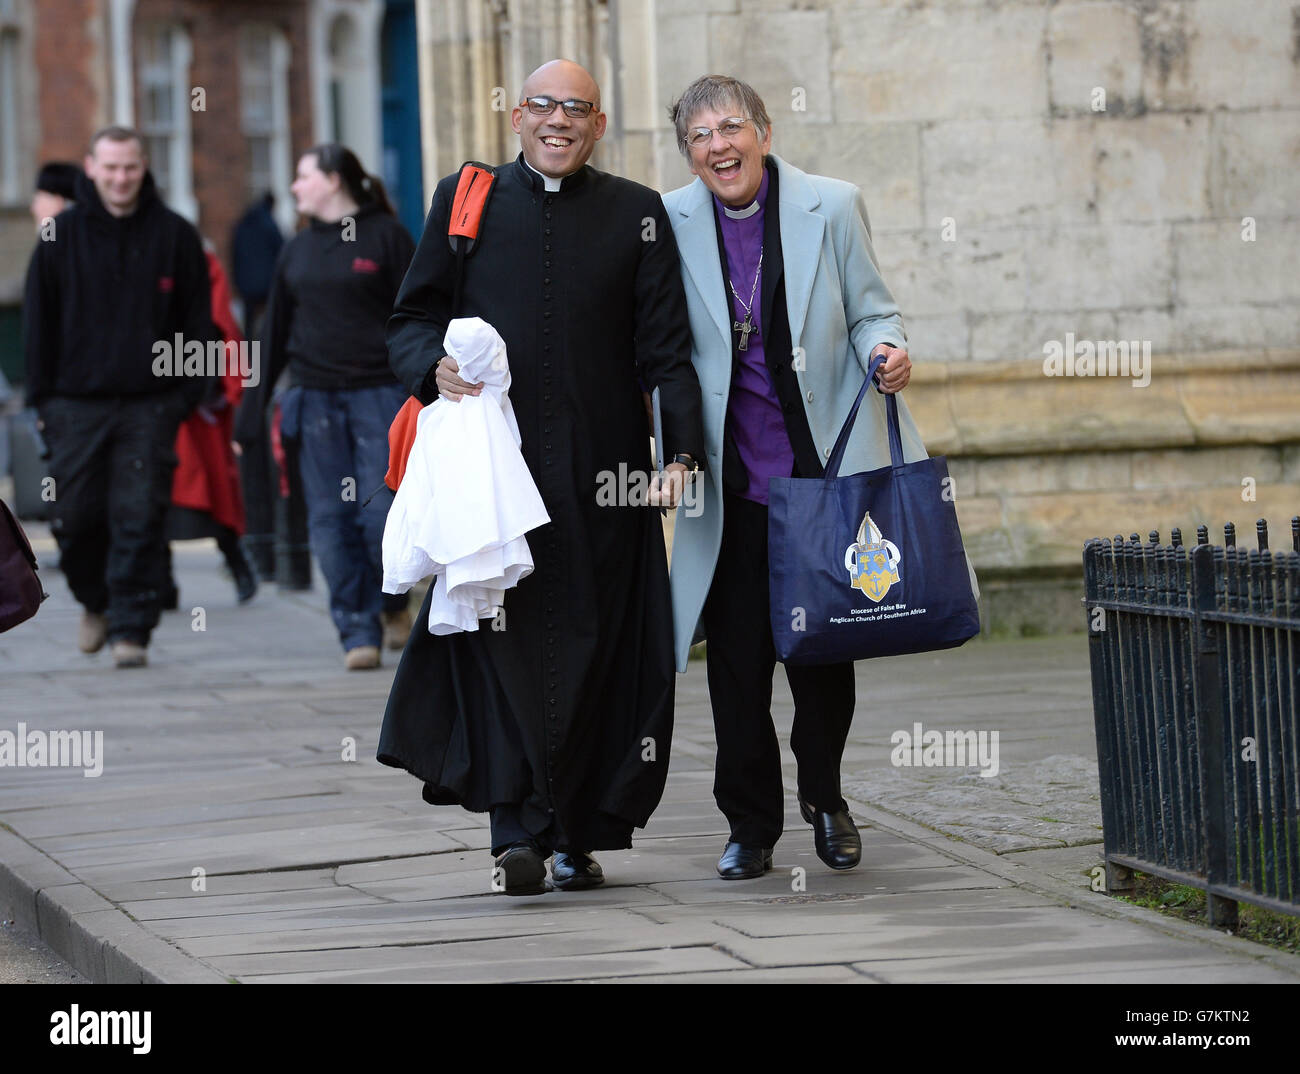 Members of the clergy arrive at York Minster, York, ahead of the consecration of the Rev Libby Lane as the eighth Bishop of Stockport. Stock Photo